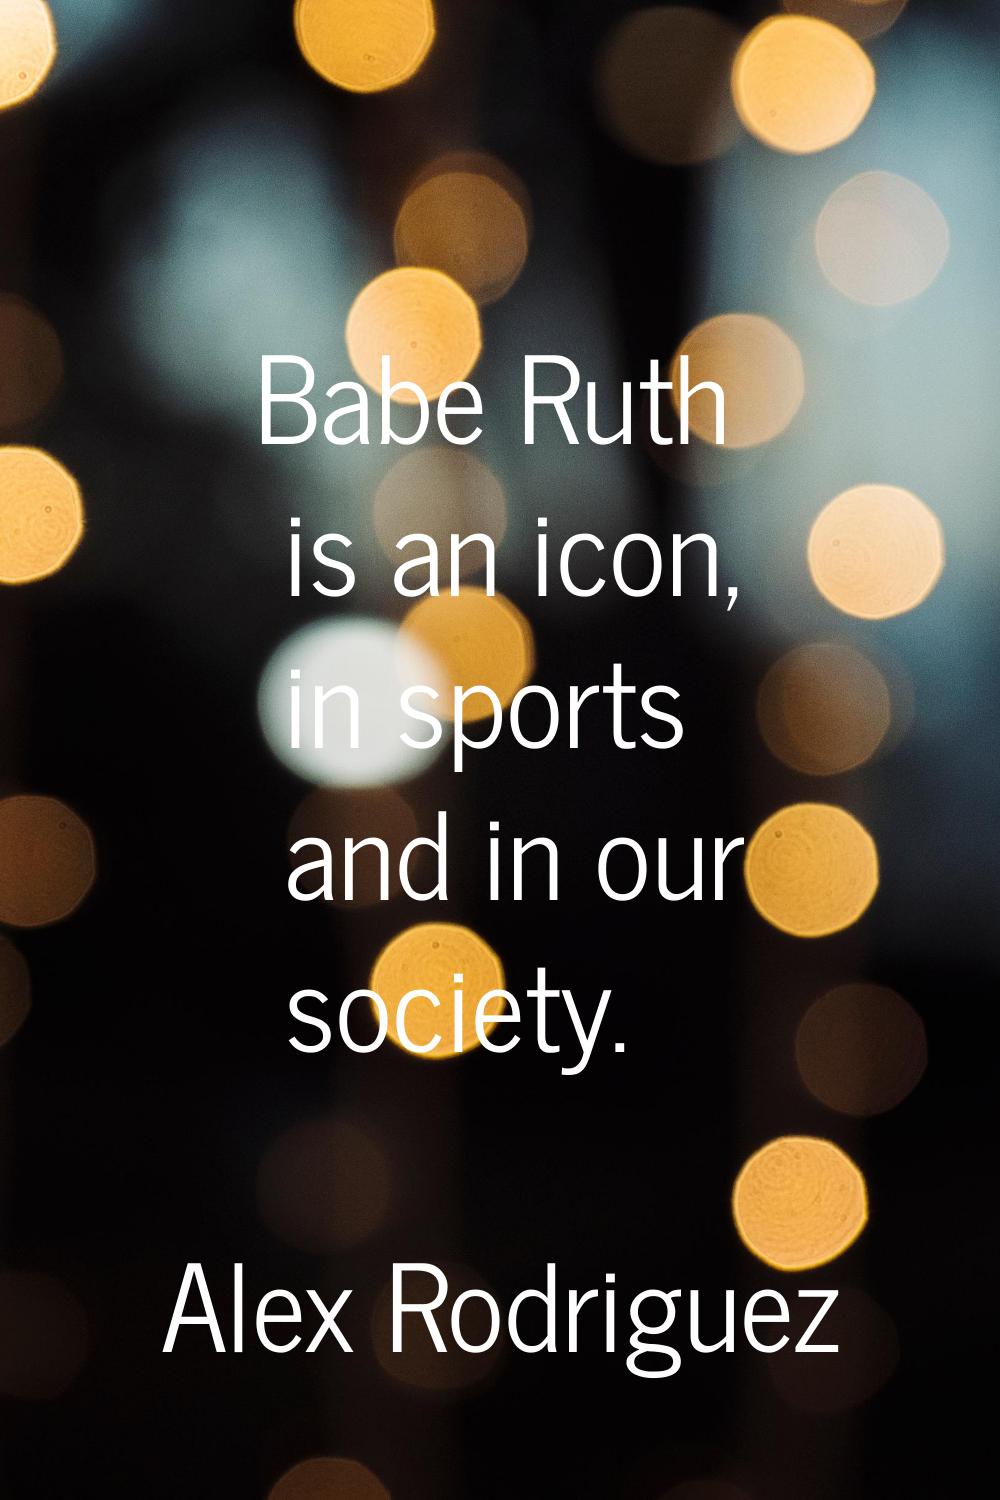 Babe Ruth is an icon, in sports and in our society.